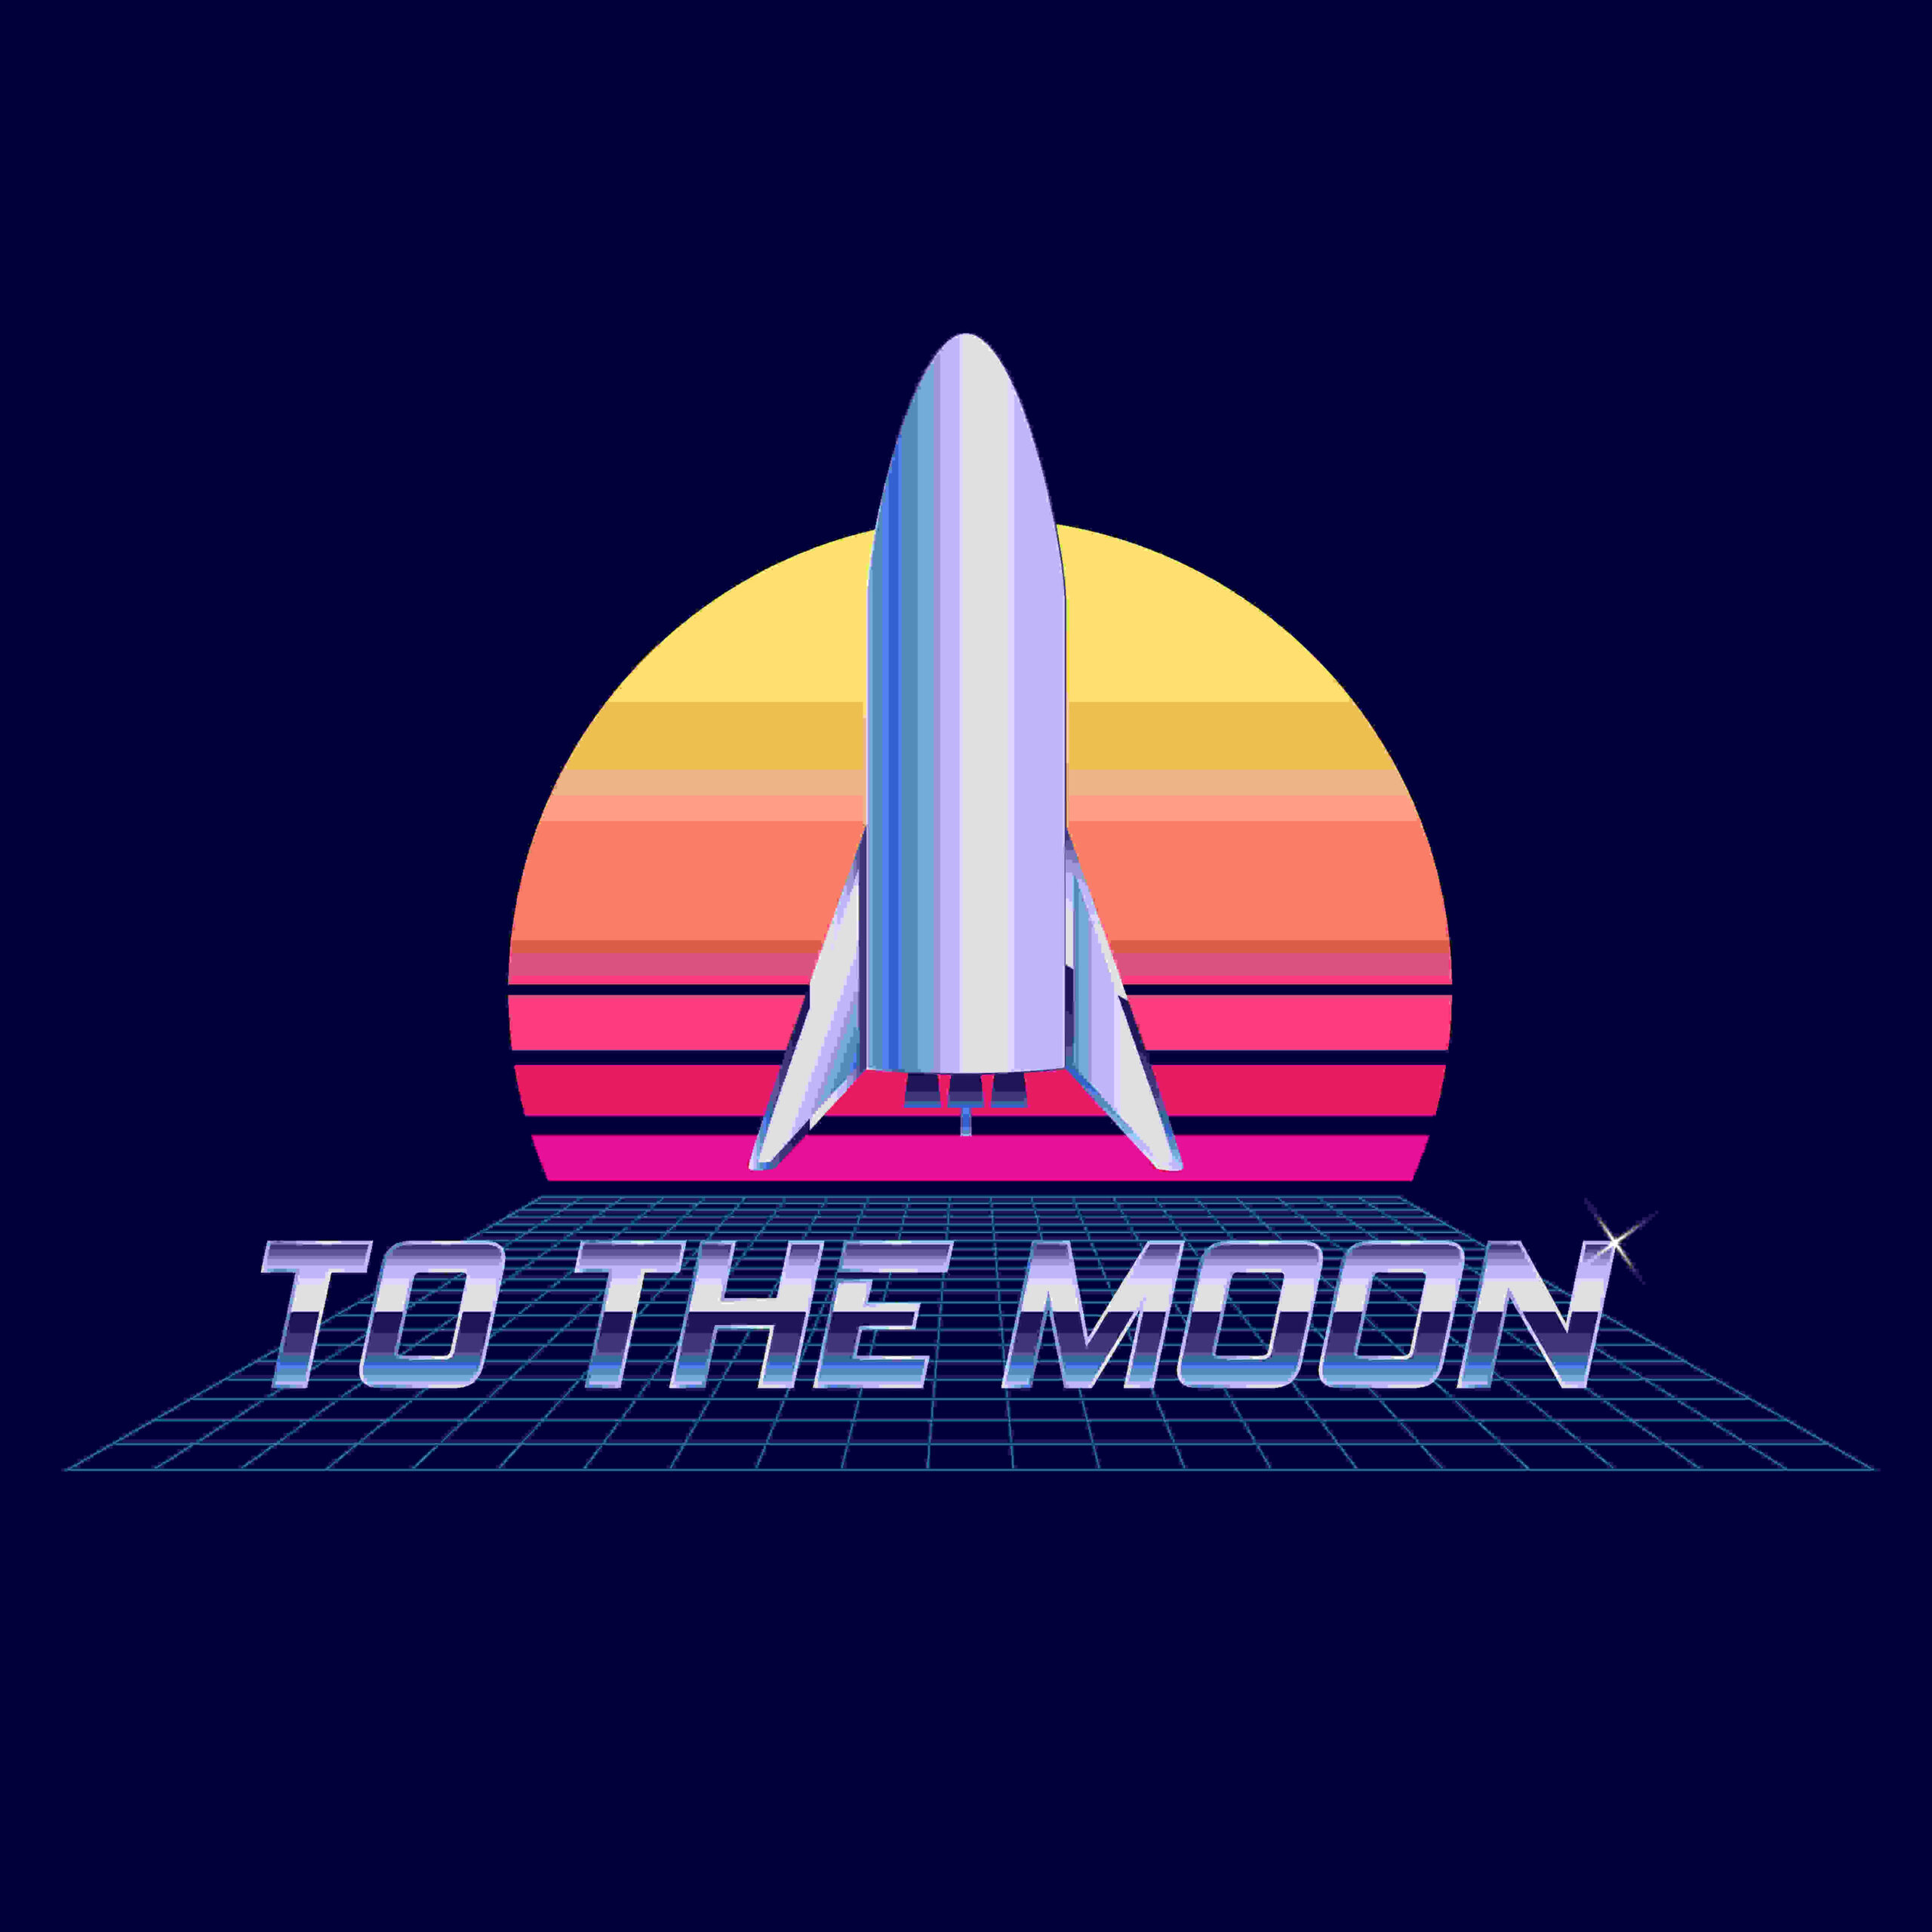 Illustration of a Rocketship and the phrase 'To the moon'